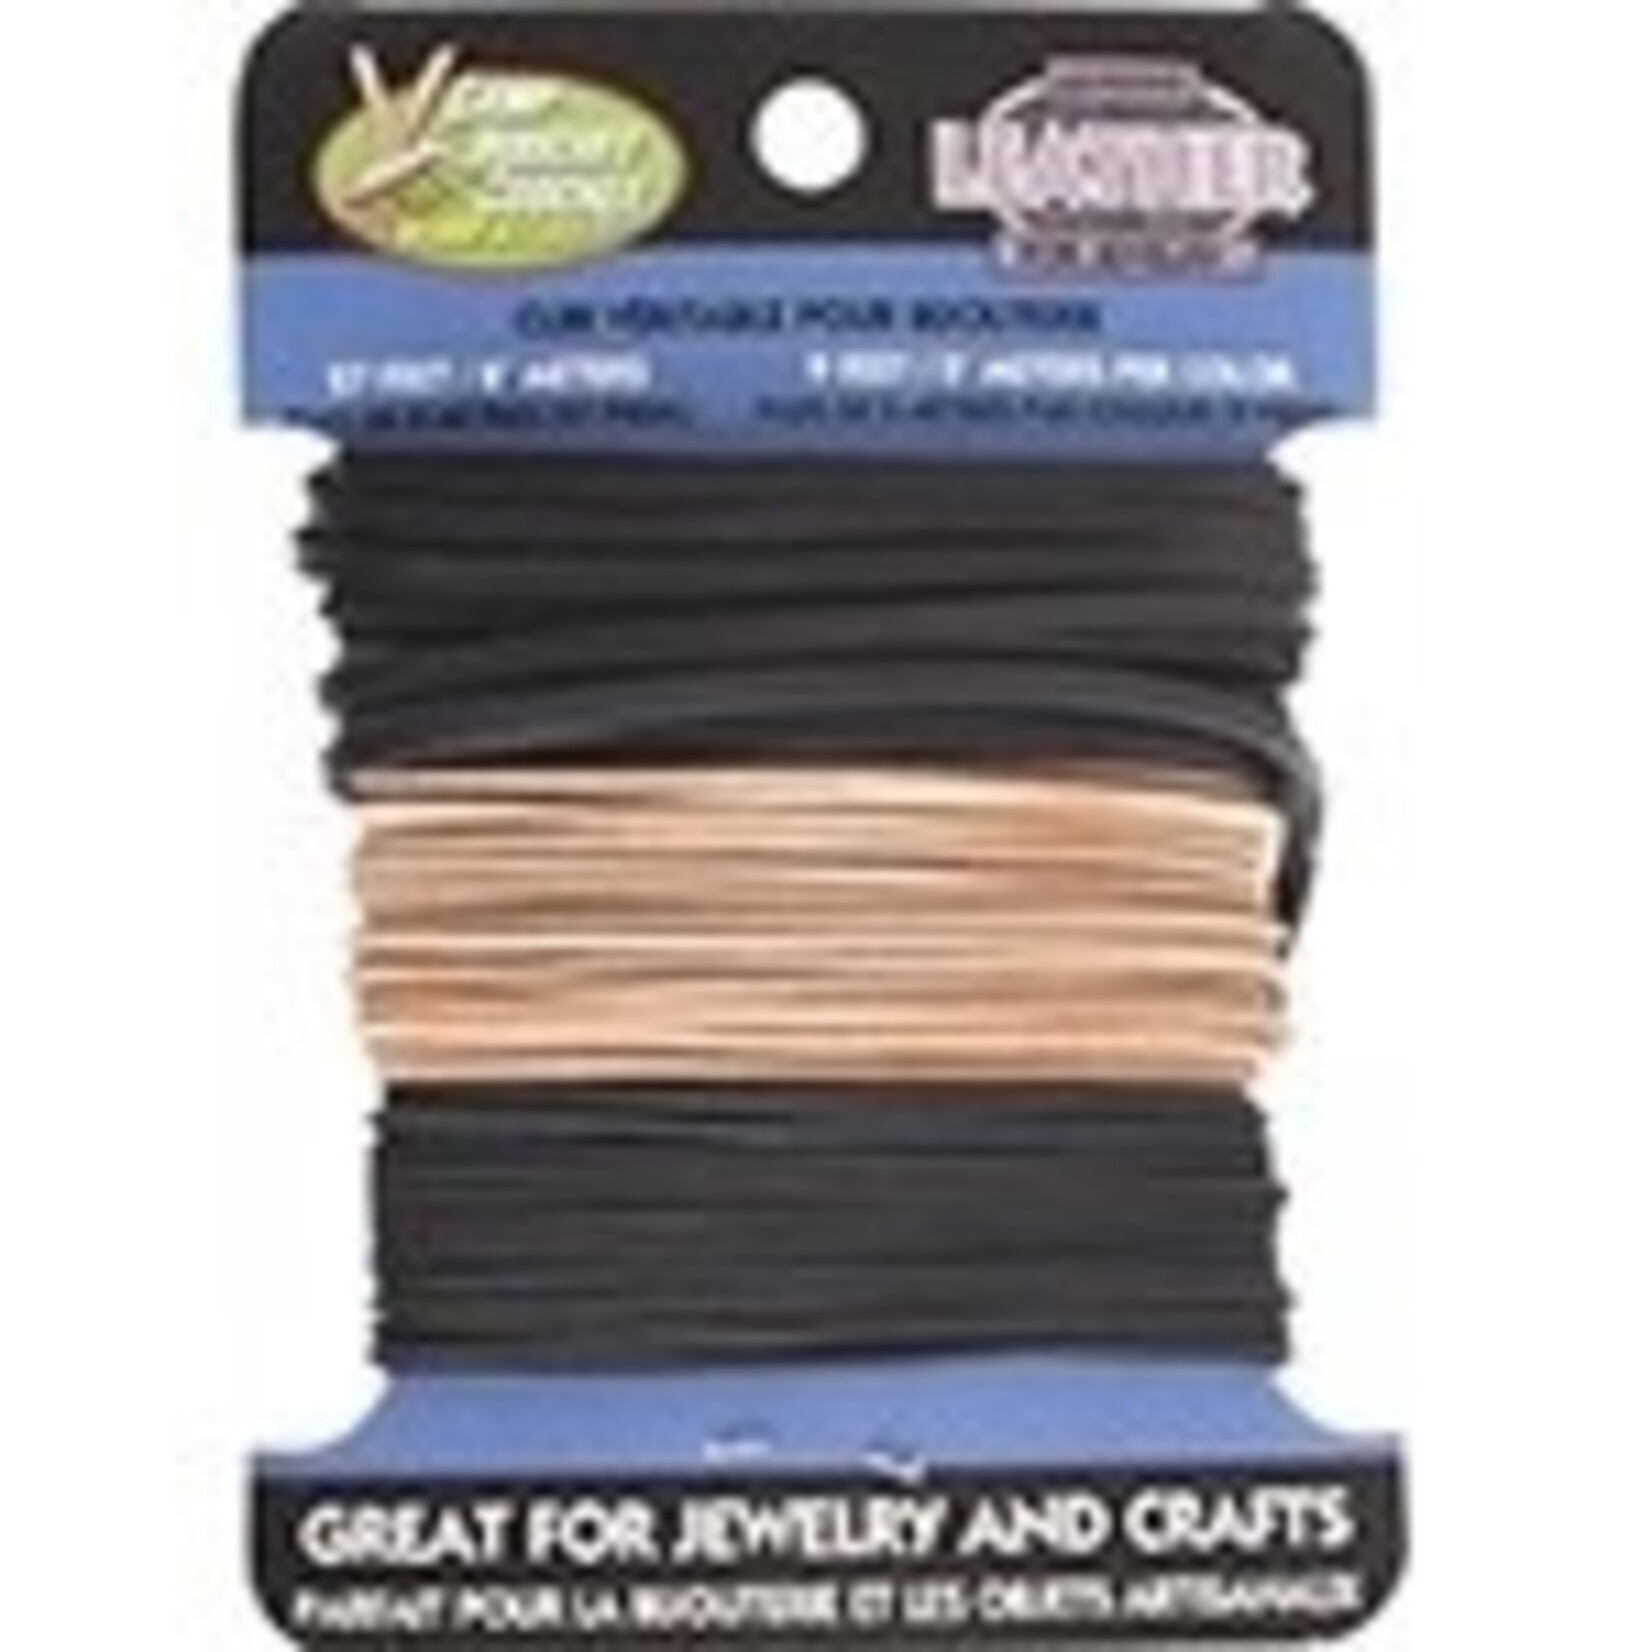 Genuine Leather For Jewelry 9Ft/ 2+Meters Per Cord